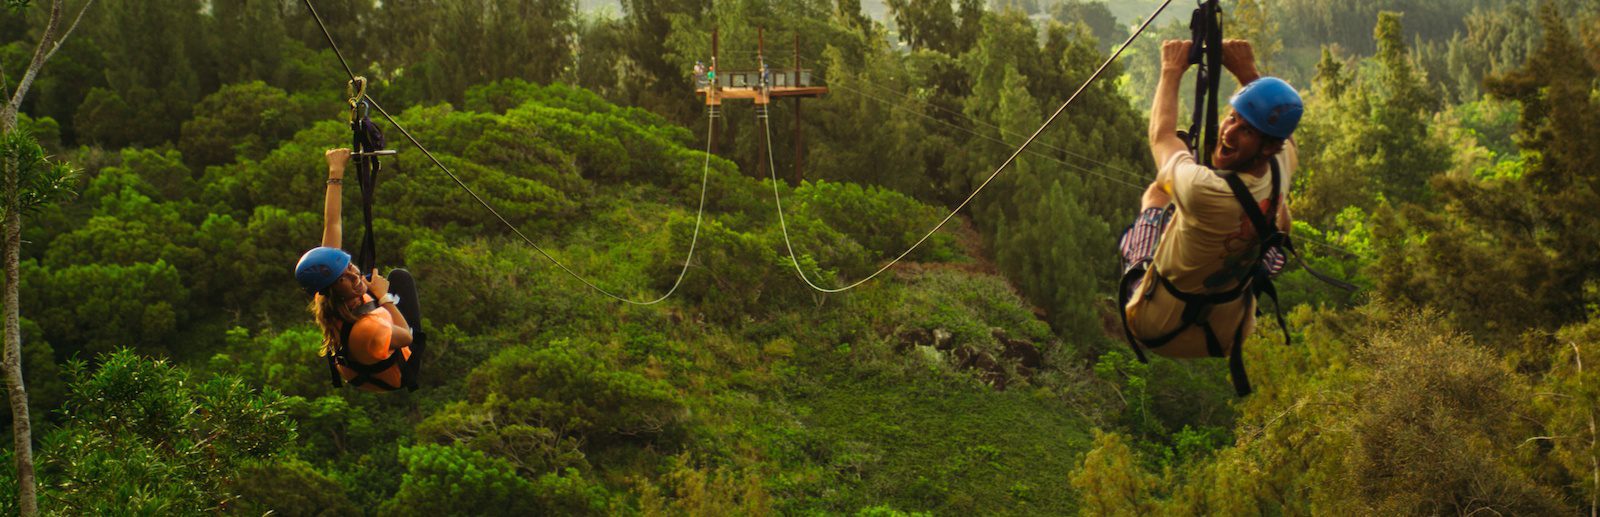 The History of Ziplining: From Jungle Exploration to Vacation Fun